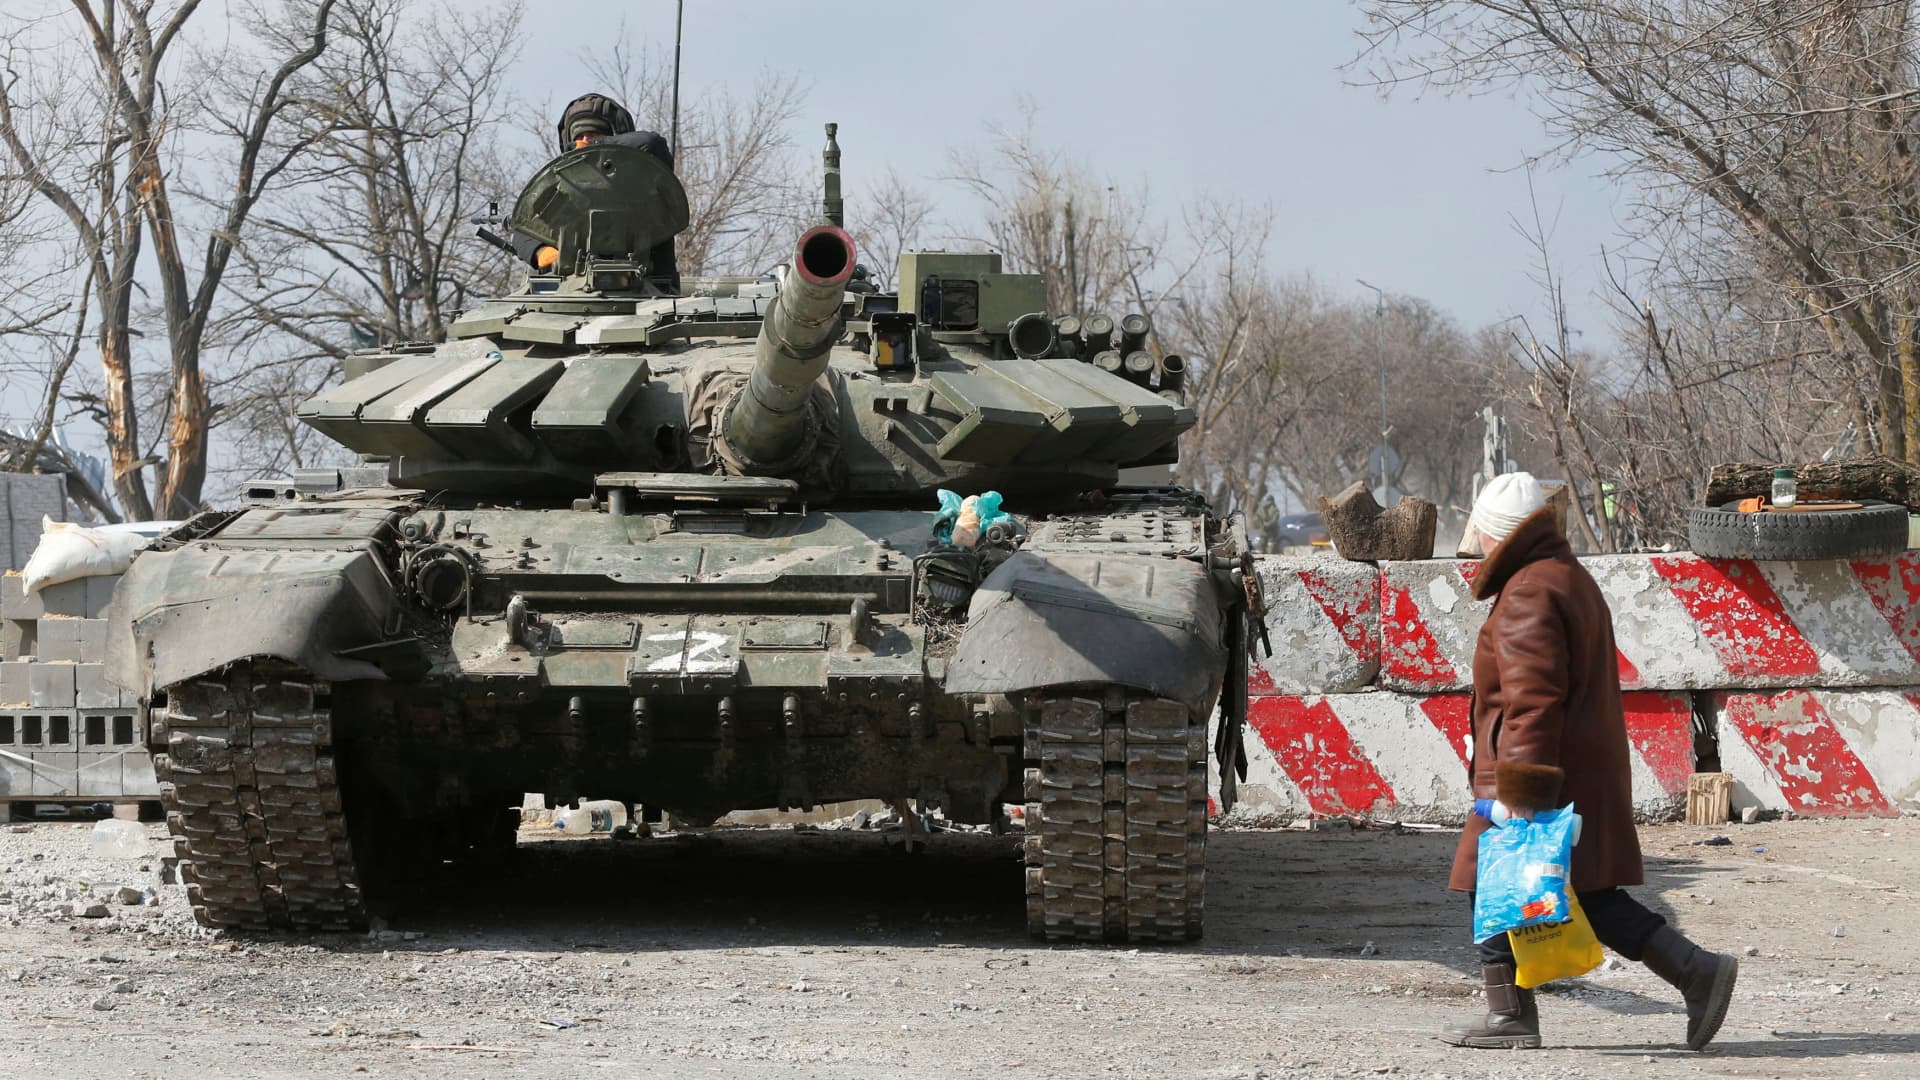 A local resident walks past a tank of pro-Russian troops during Ukraine-Russia conflict in the besieged southern port city of Mariupol, Ukraine March 18, 2022.